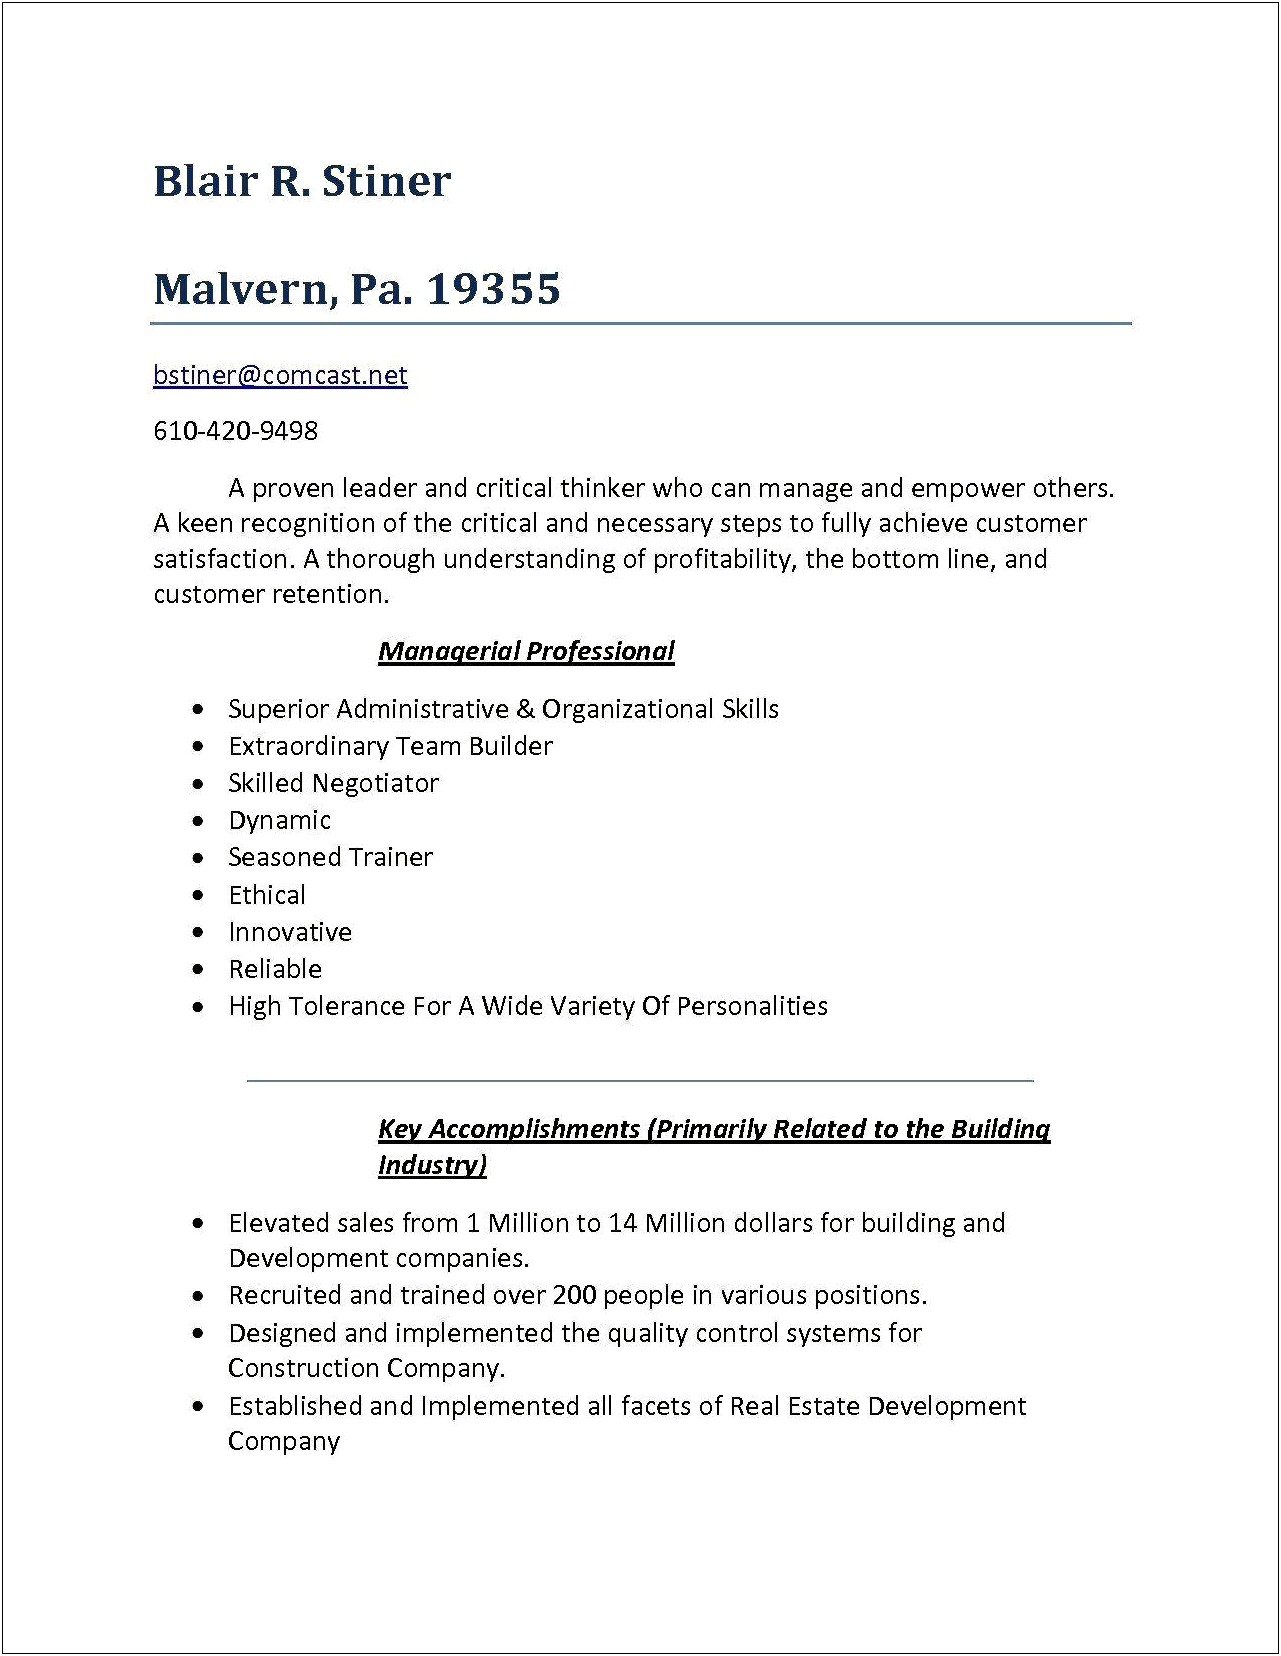 Example Of Personal Characteristics Resume